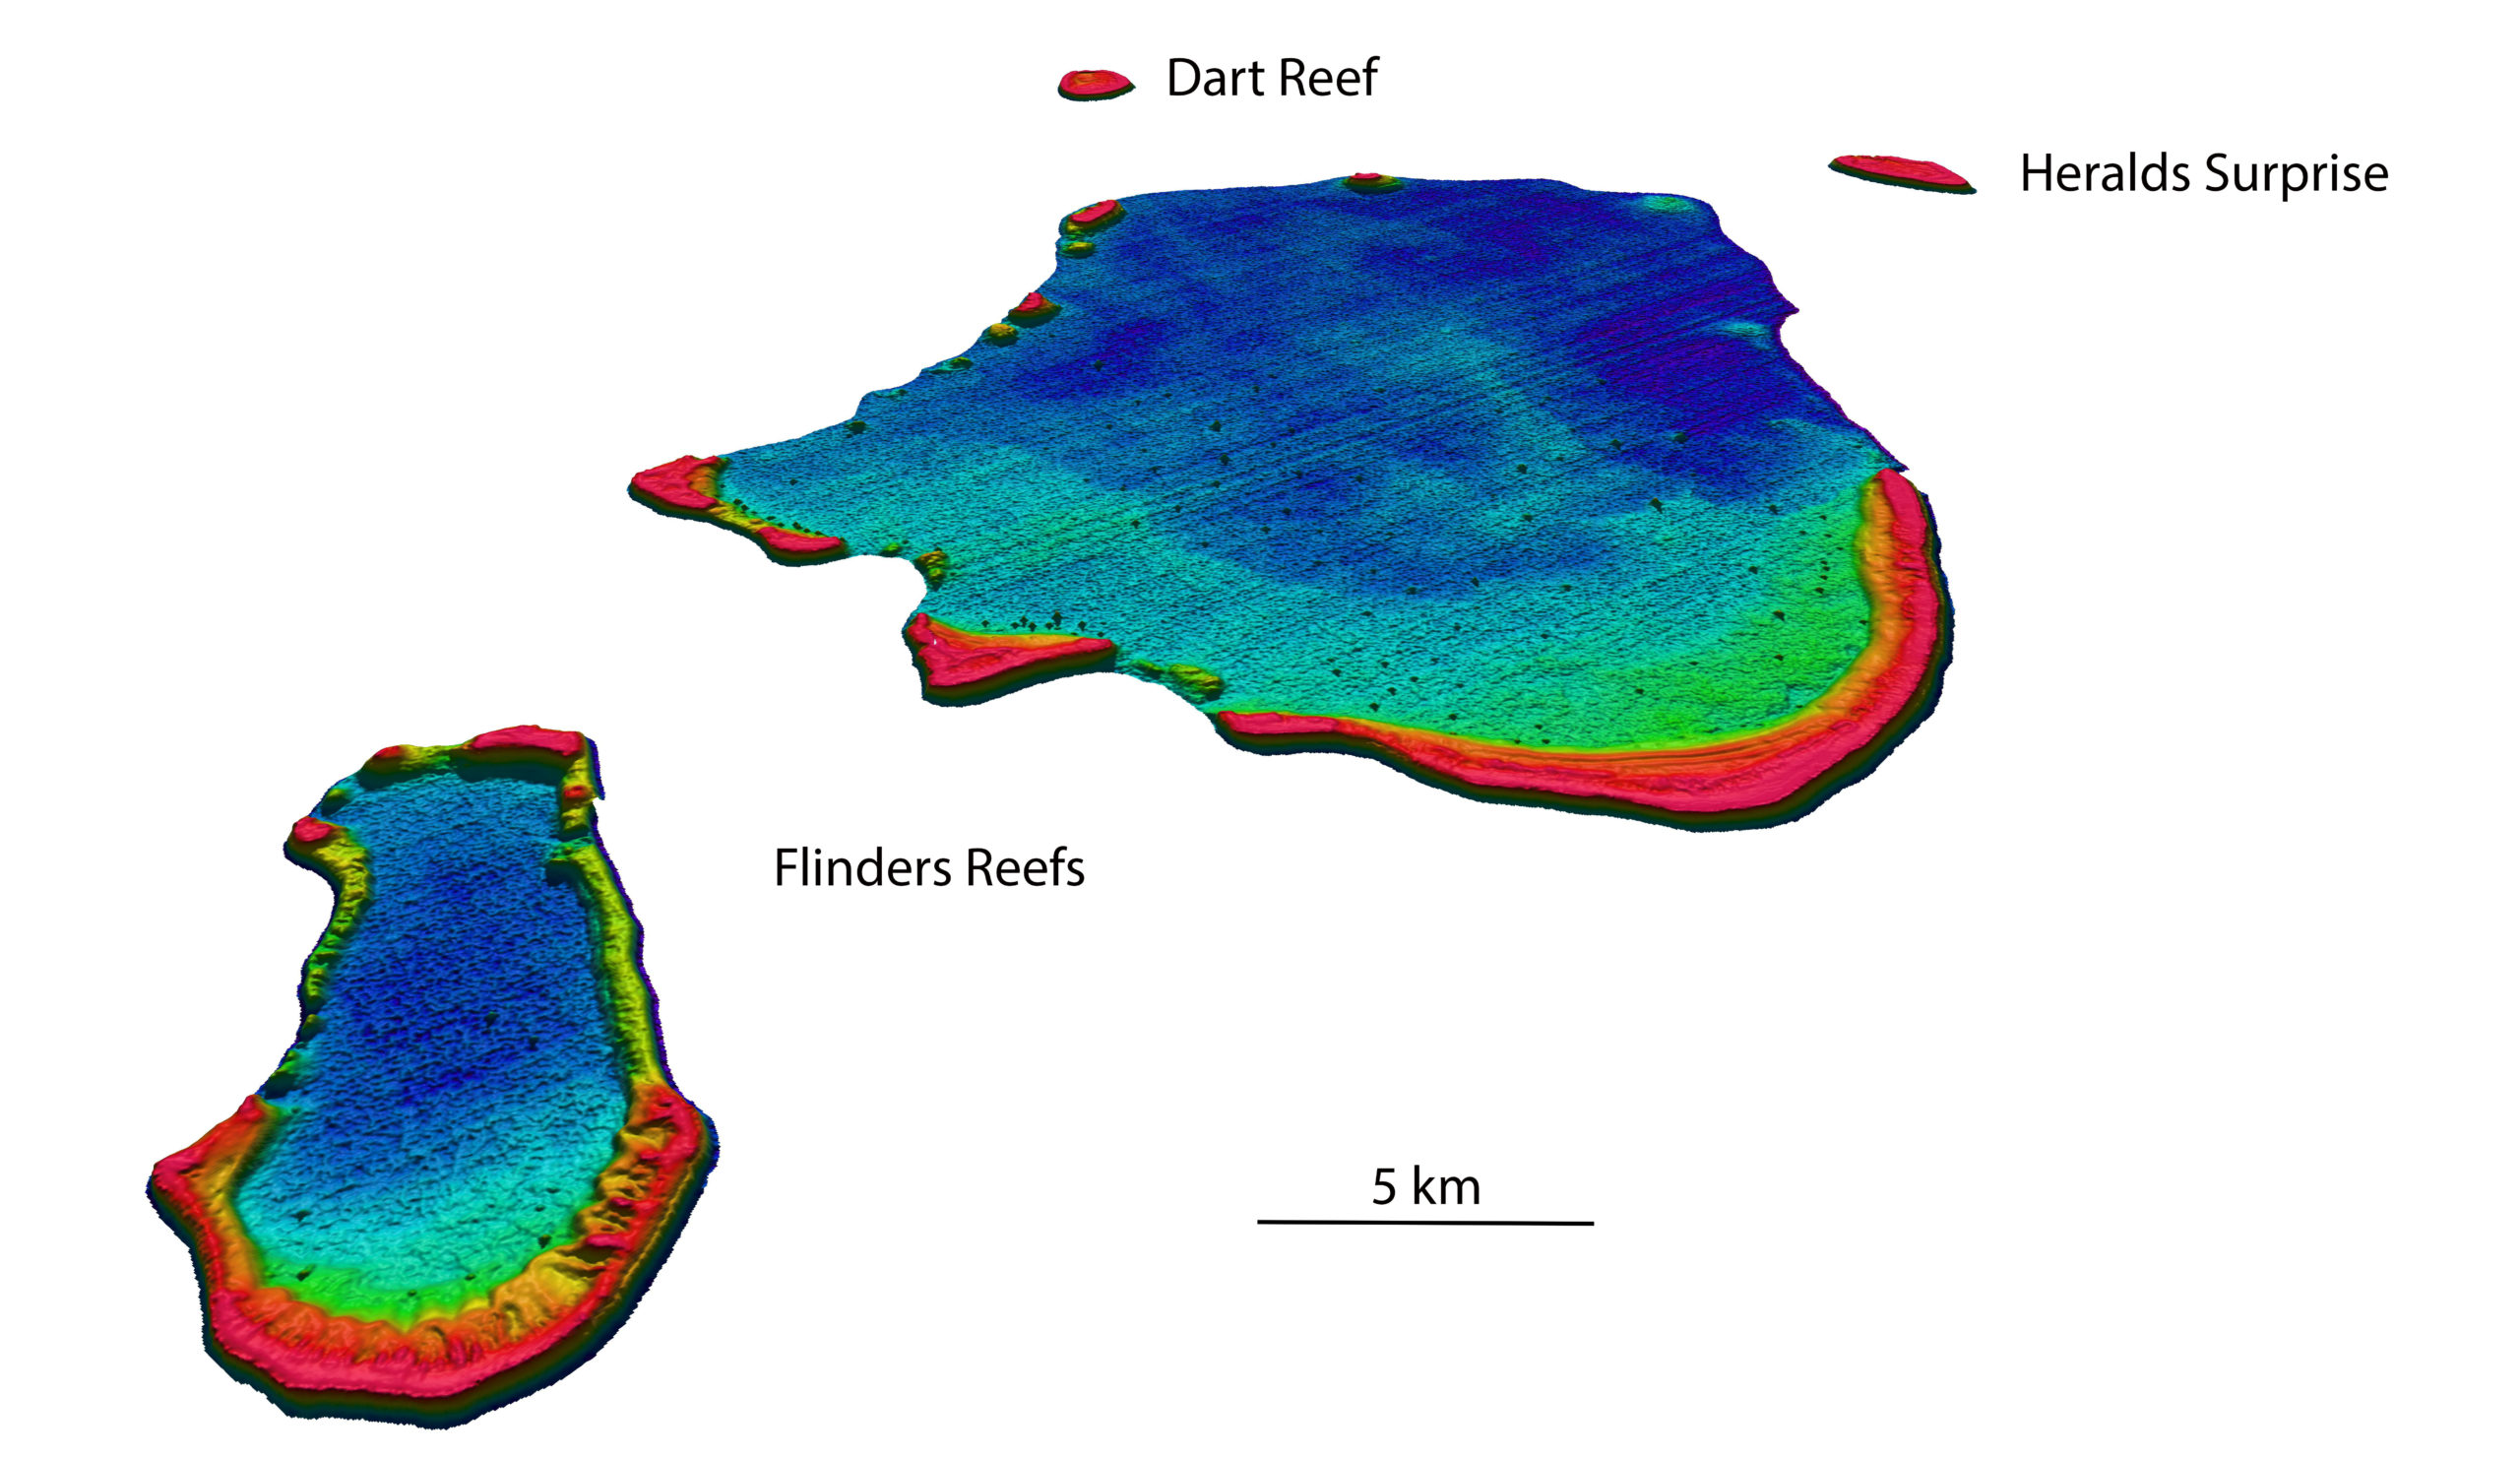 North-westerly view of the Flinders Reefs in the Coral Sea, about 230 km offshore from Townsville. Depths are coloured red (shallow) to purple (deep), over a depth range of about 50 metres. Source: Bathymetry data © (2015) EOMAP Bathymetry